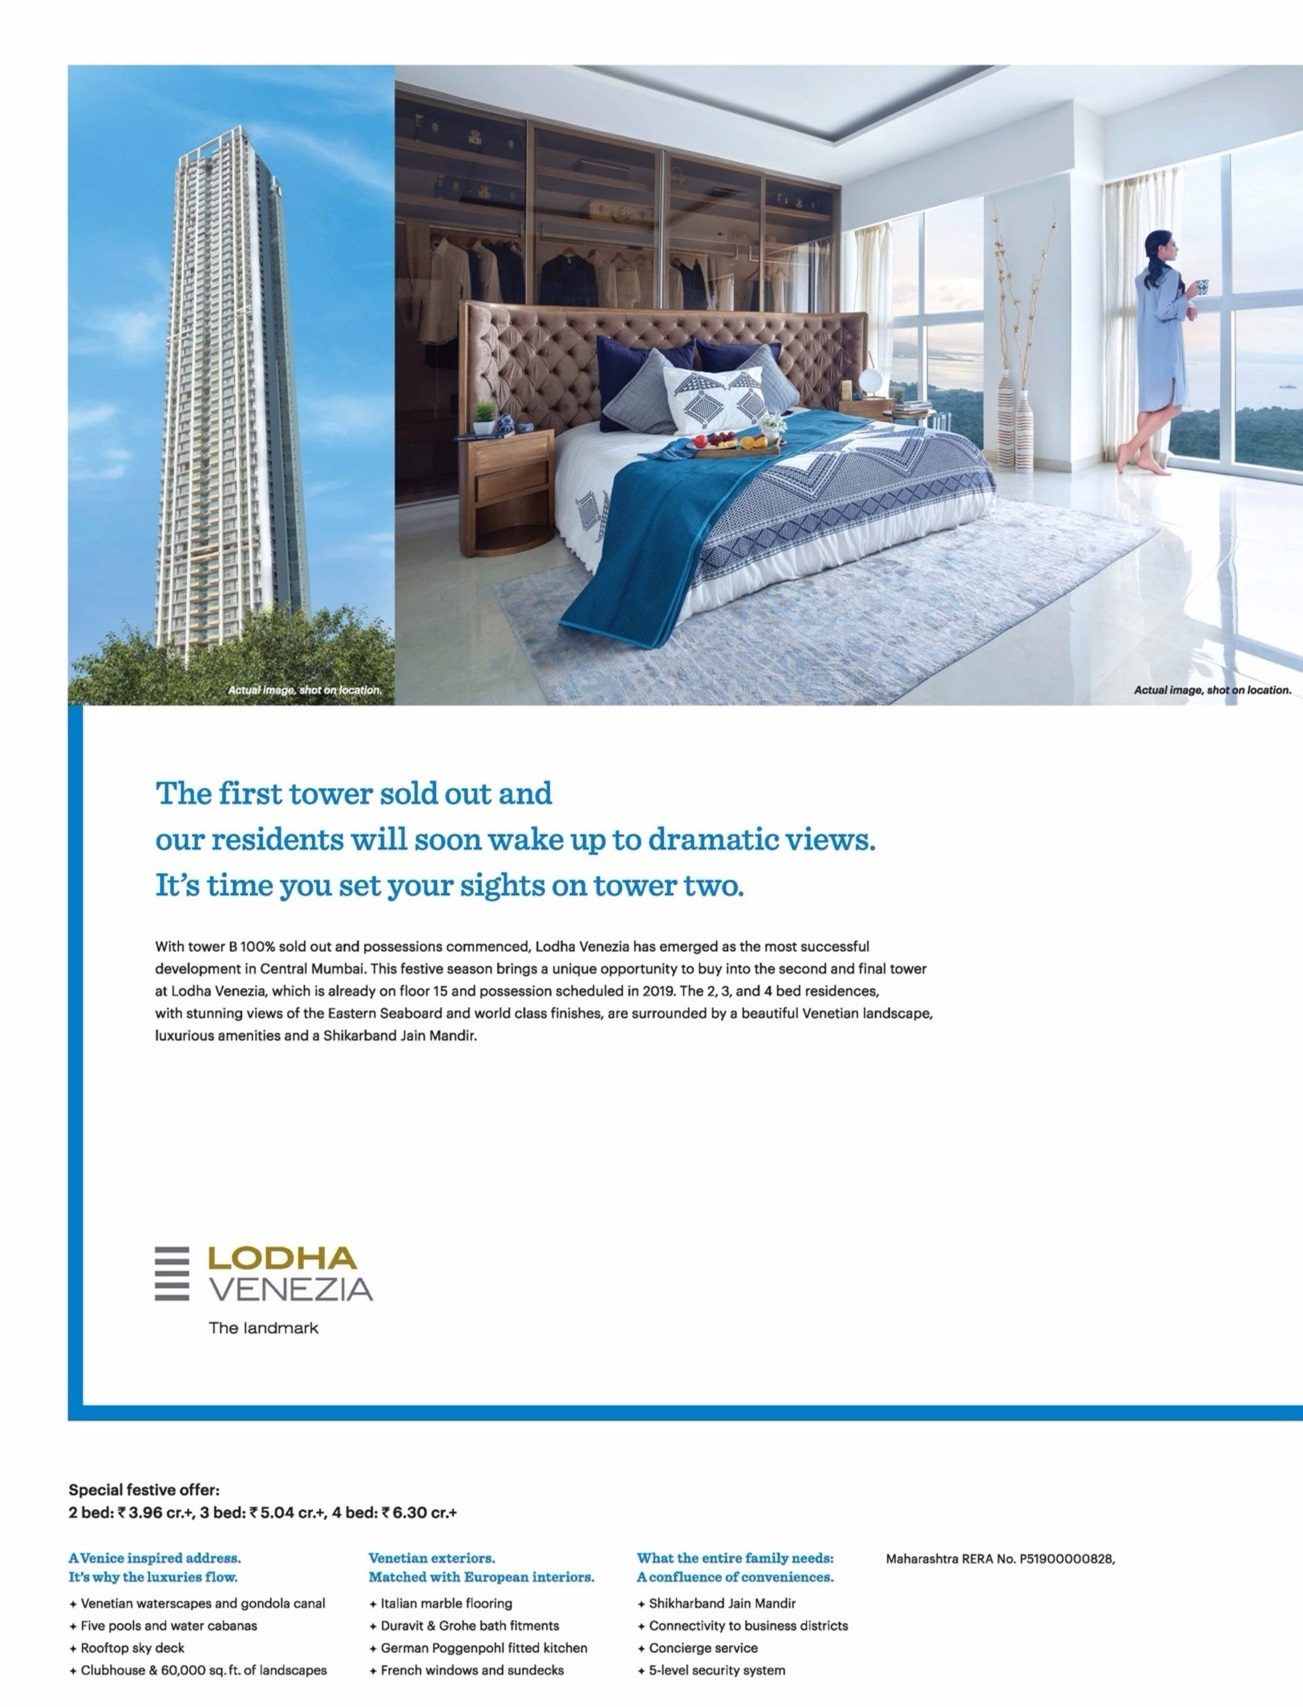 Special festive offer with 2 bed @ Rs. 3.96 cr.+, 3 bed @ Rs. 5.04 cr.+ & 4 bed @ Rs. 6.30 cr.+ at Lodha Venezia in Mumbai Update